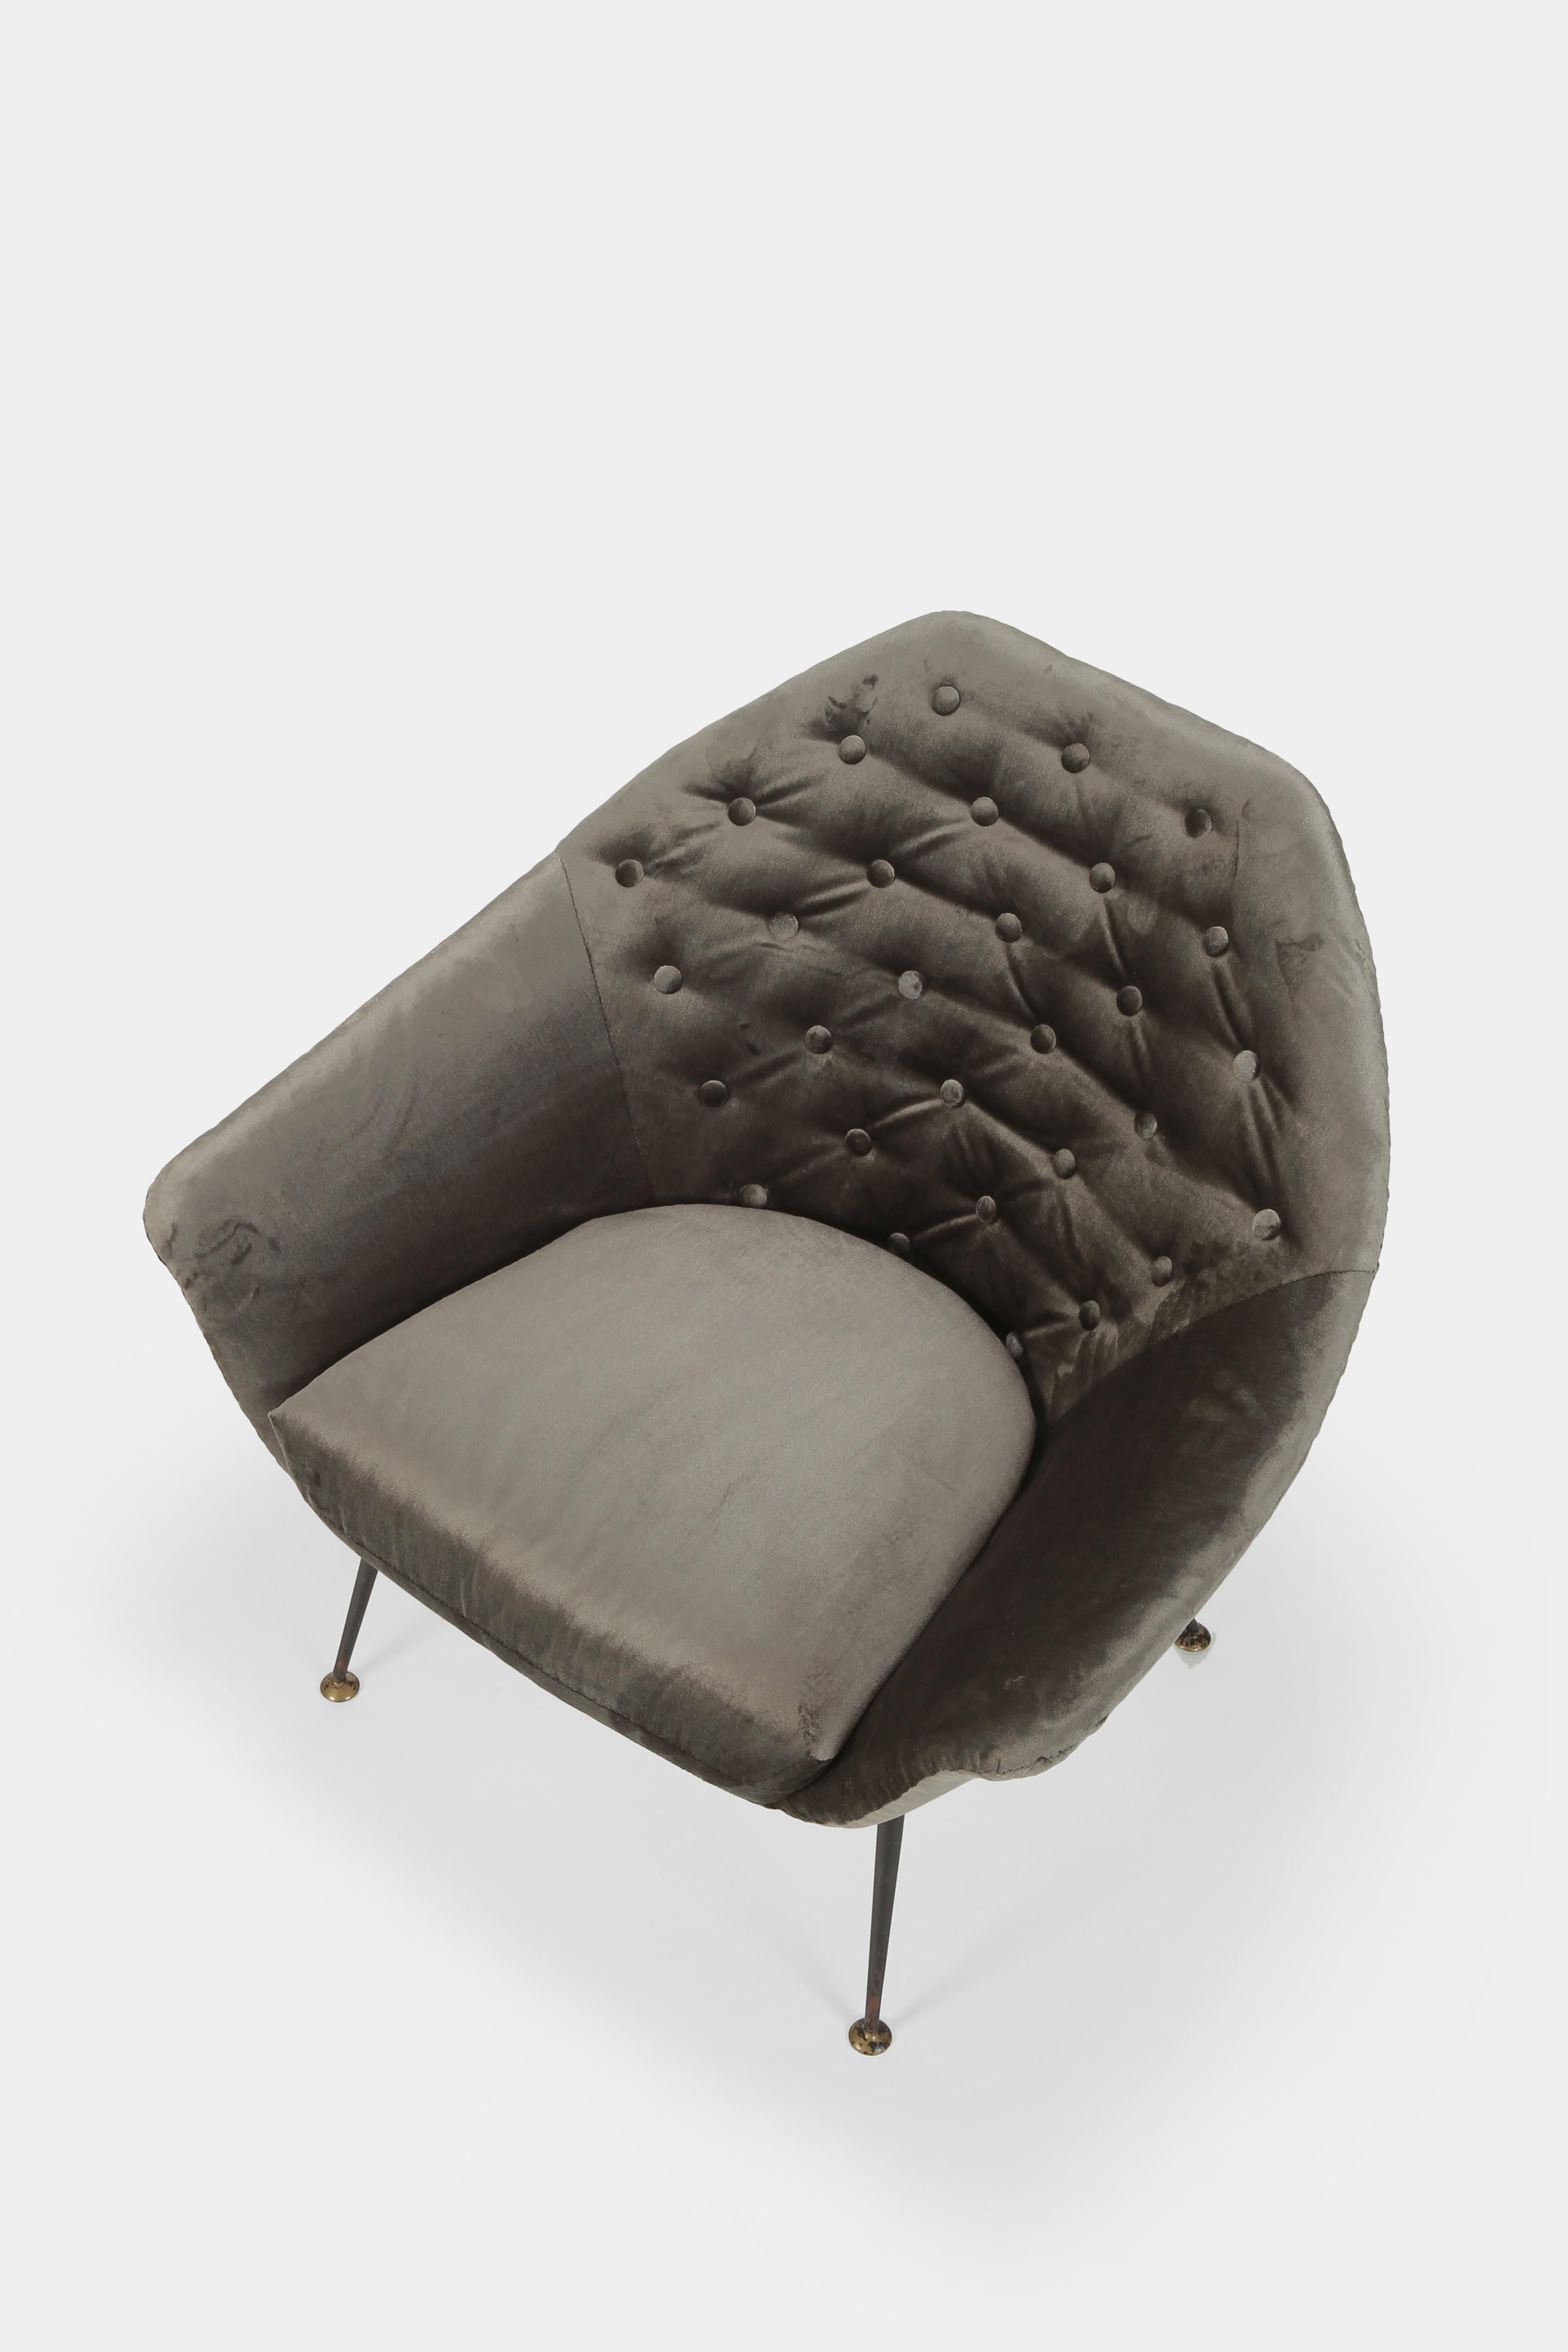 Very rare armchair P43 by Gastone Rinaldi made by Rima in the fifties in Italy. Beautiful form revived by a detailed re-upholstery in silver-grey velvet. A luxurious midcentury design classic that oozes sensuality in a way that only Italian